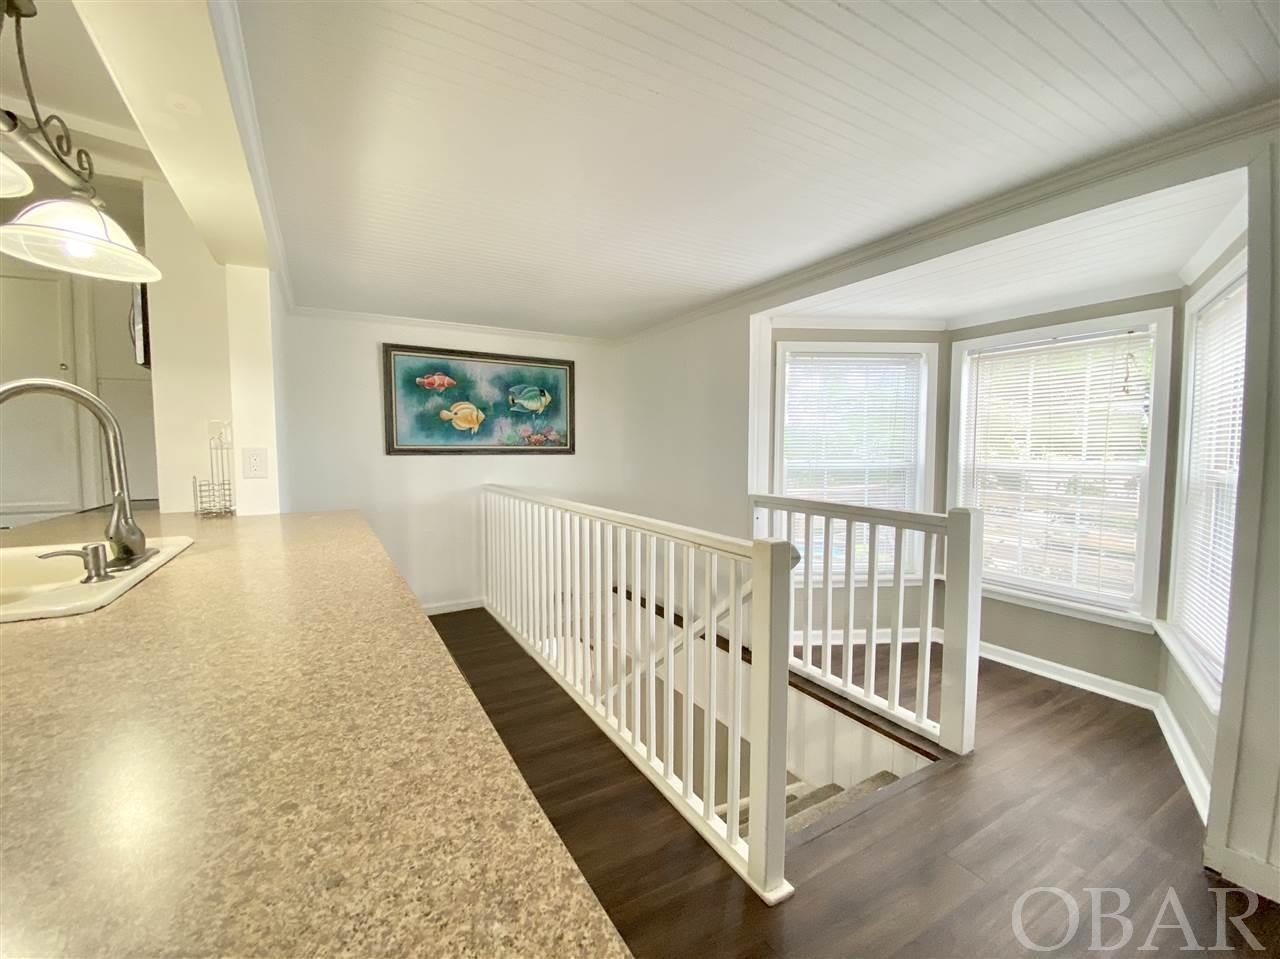 Nags Head, North Carolina 27959, 3 Bedrooms Bedrooms, ,3 BathroomsBathrooms,Single family - detached,For sale,Old Cove Road,111096